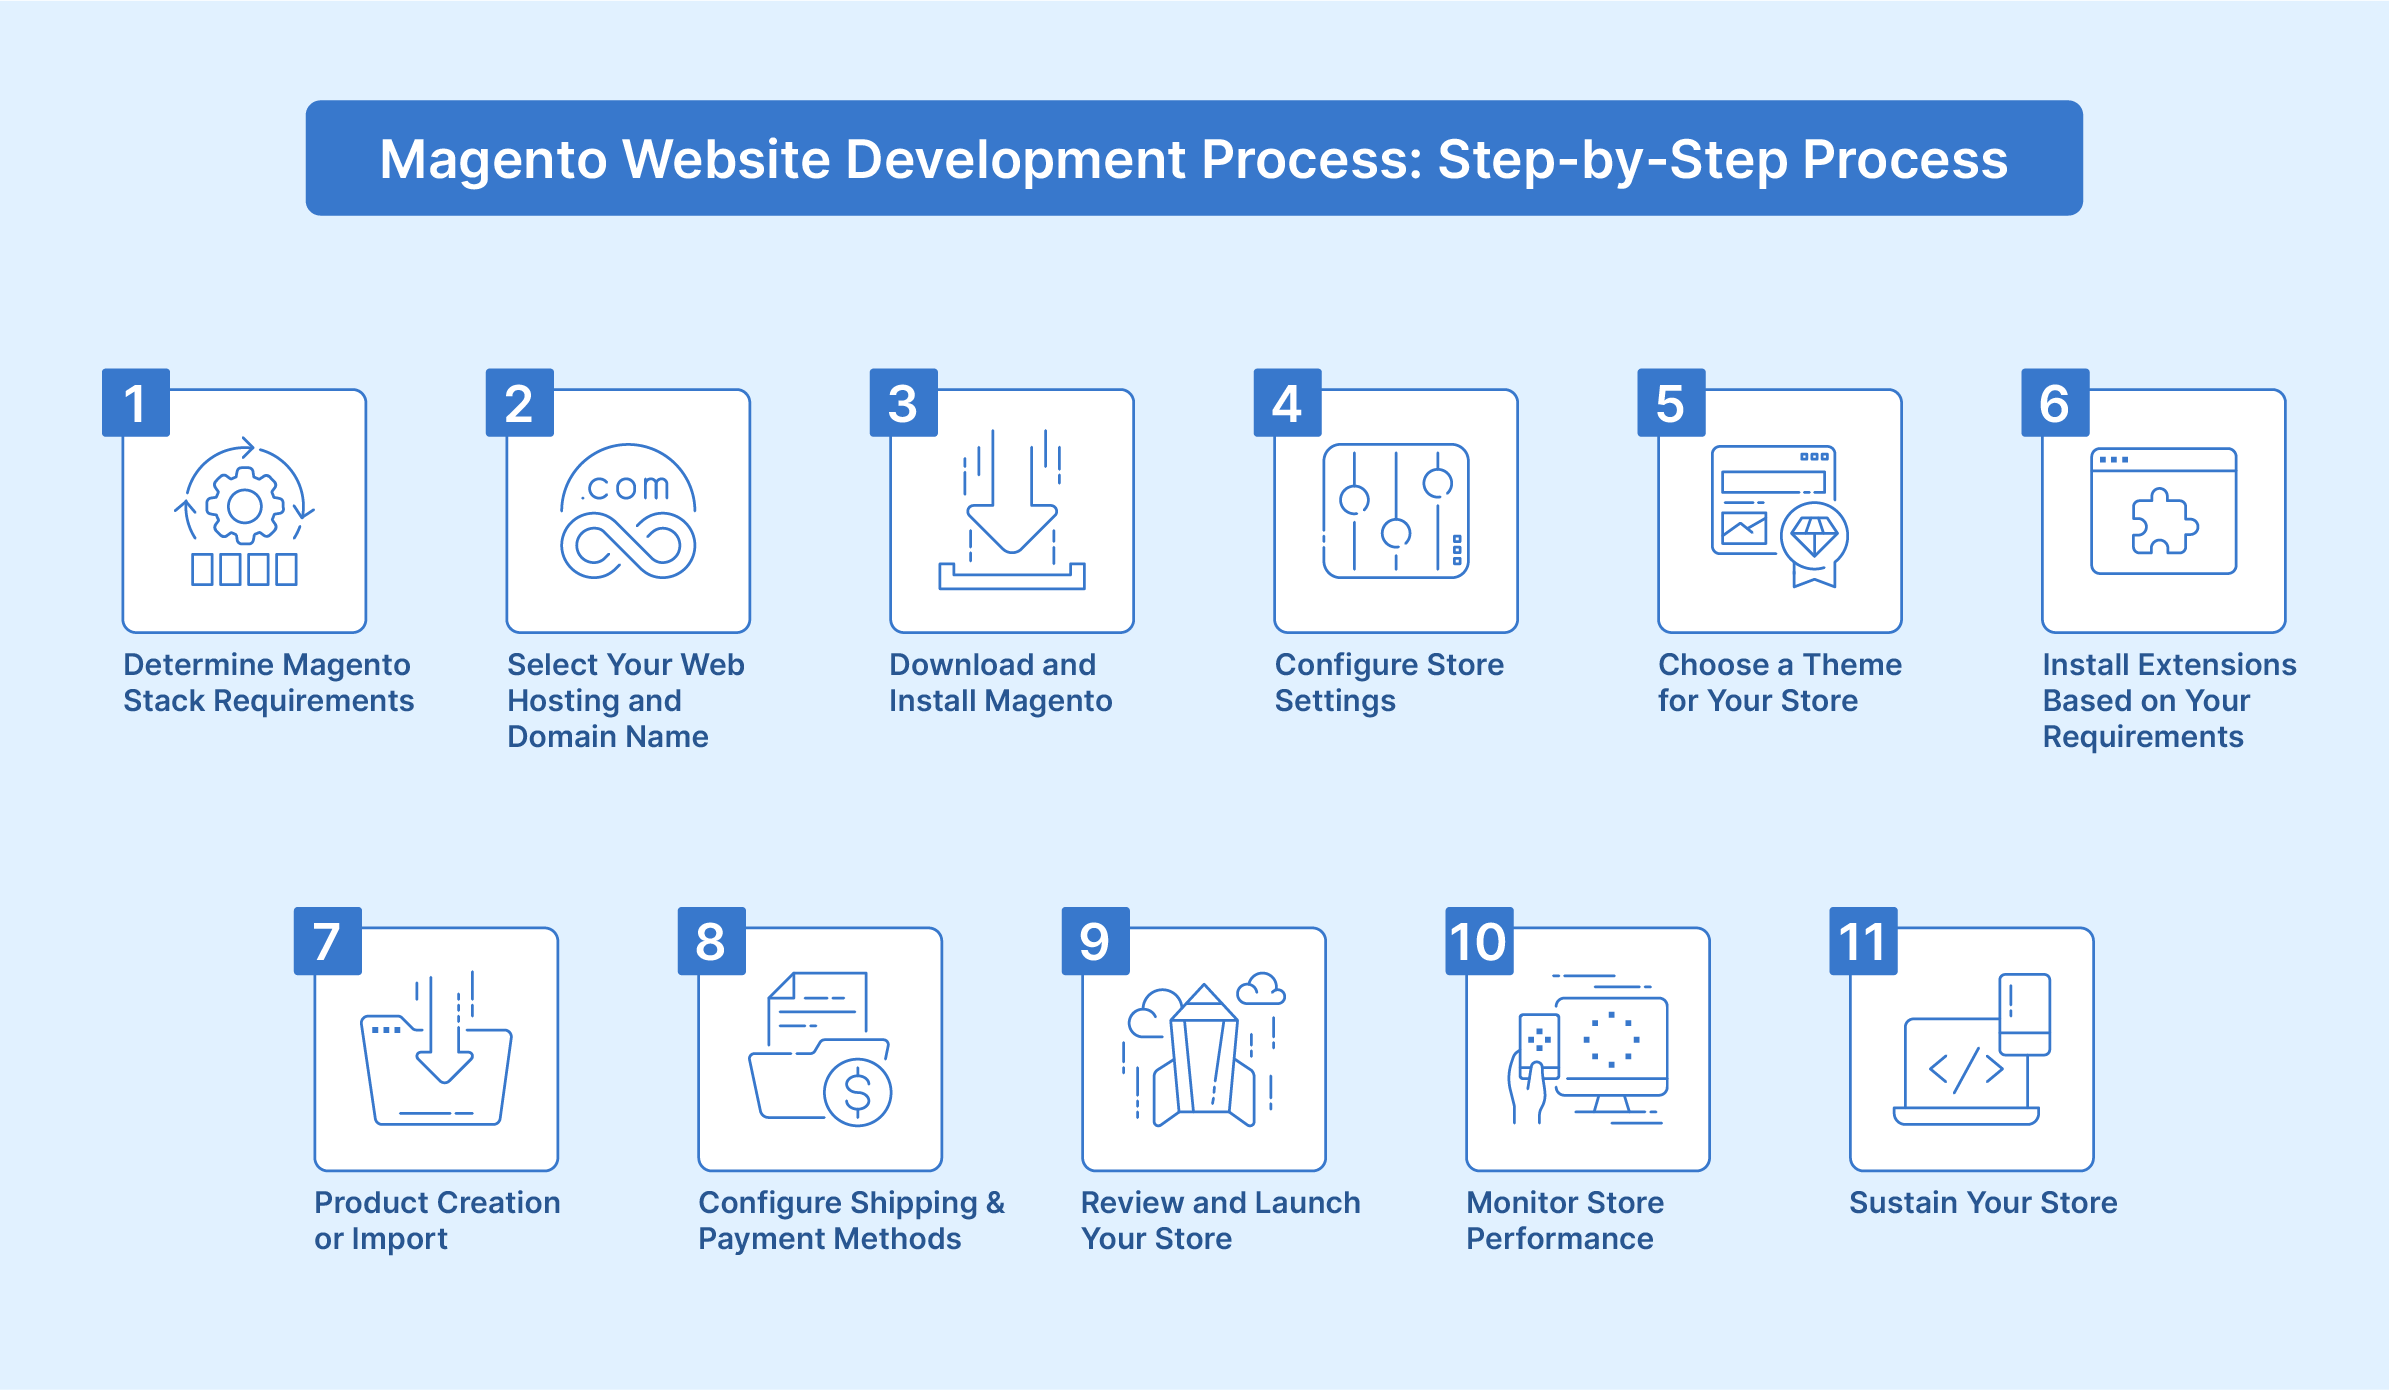 Step-by-step Magento eCommerce website development process